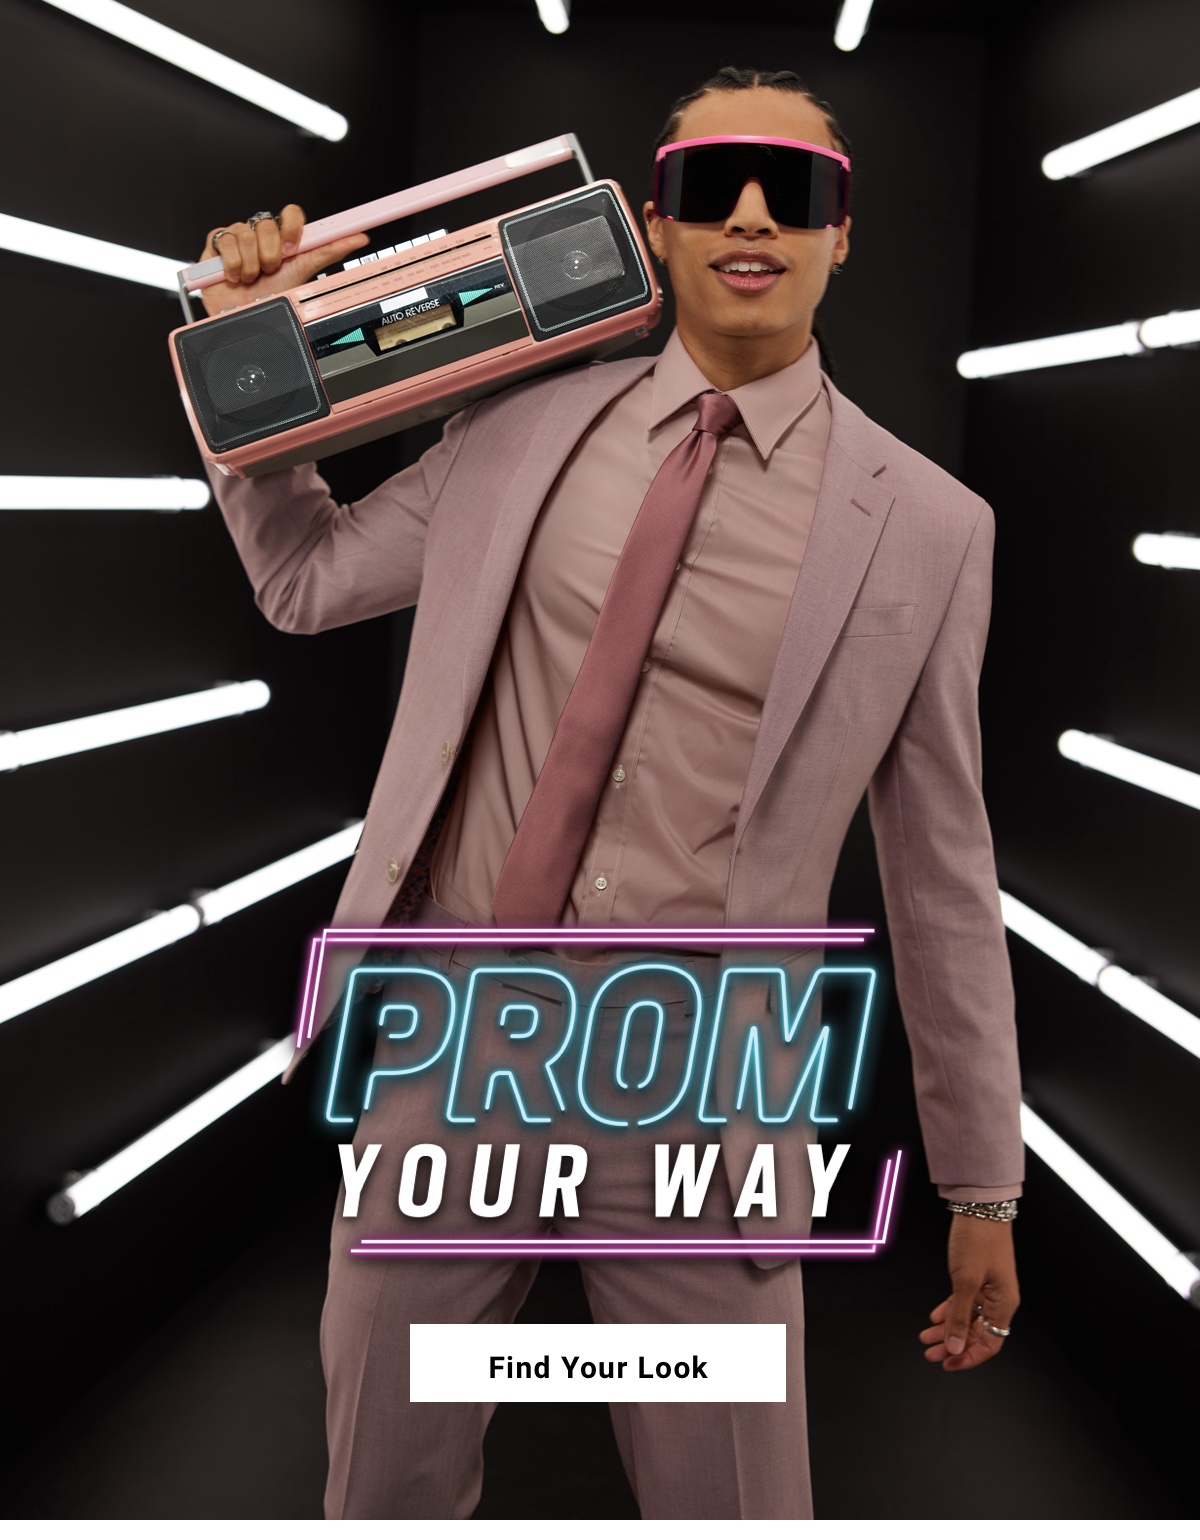 prom your way Find your Look